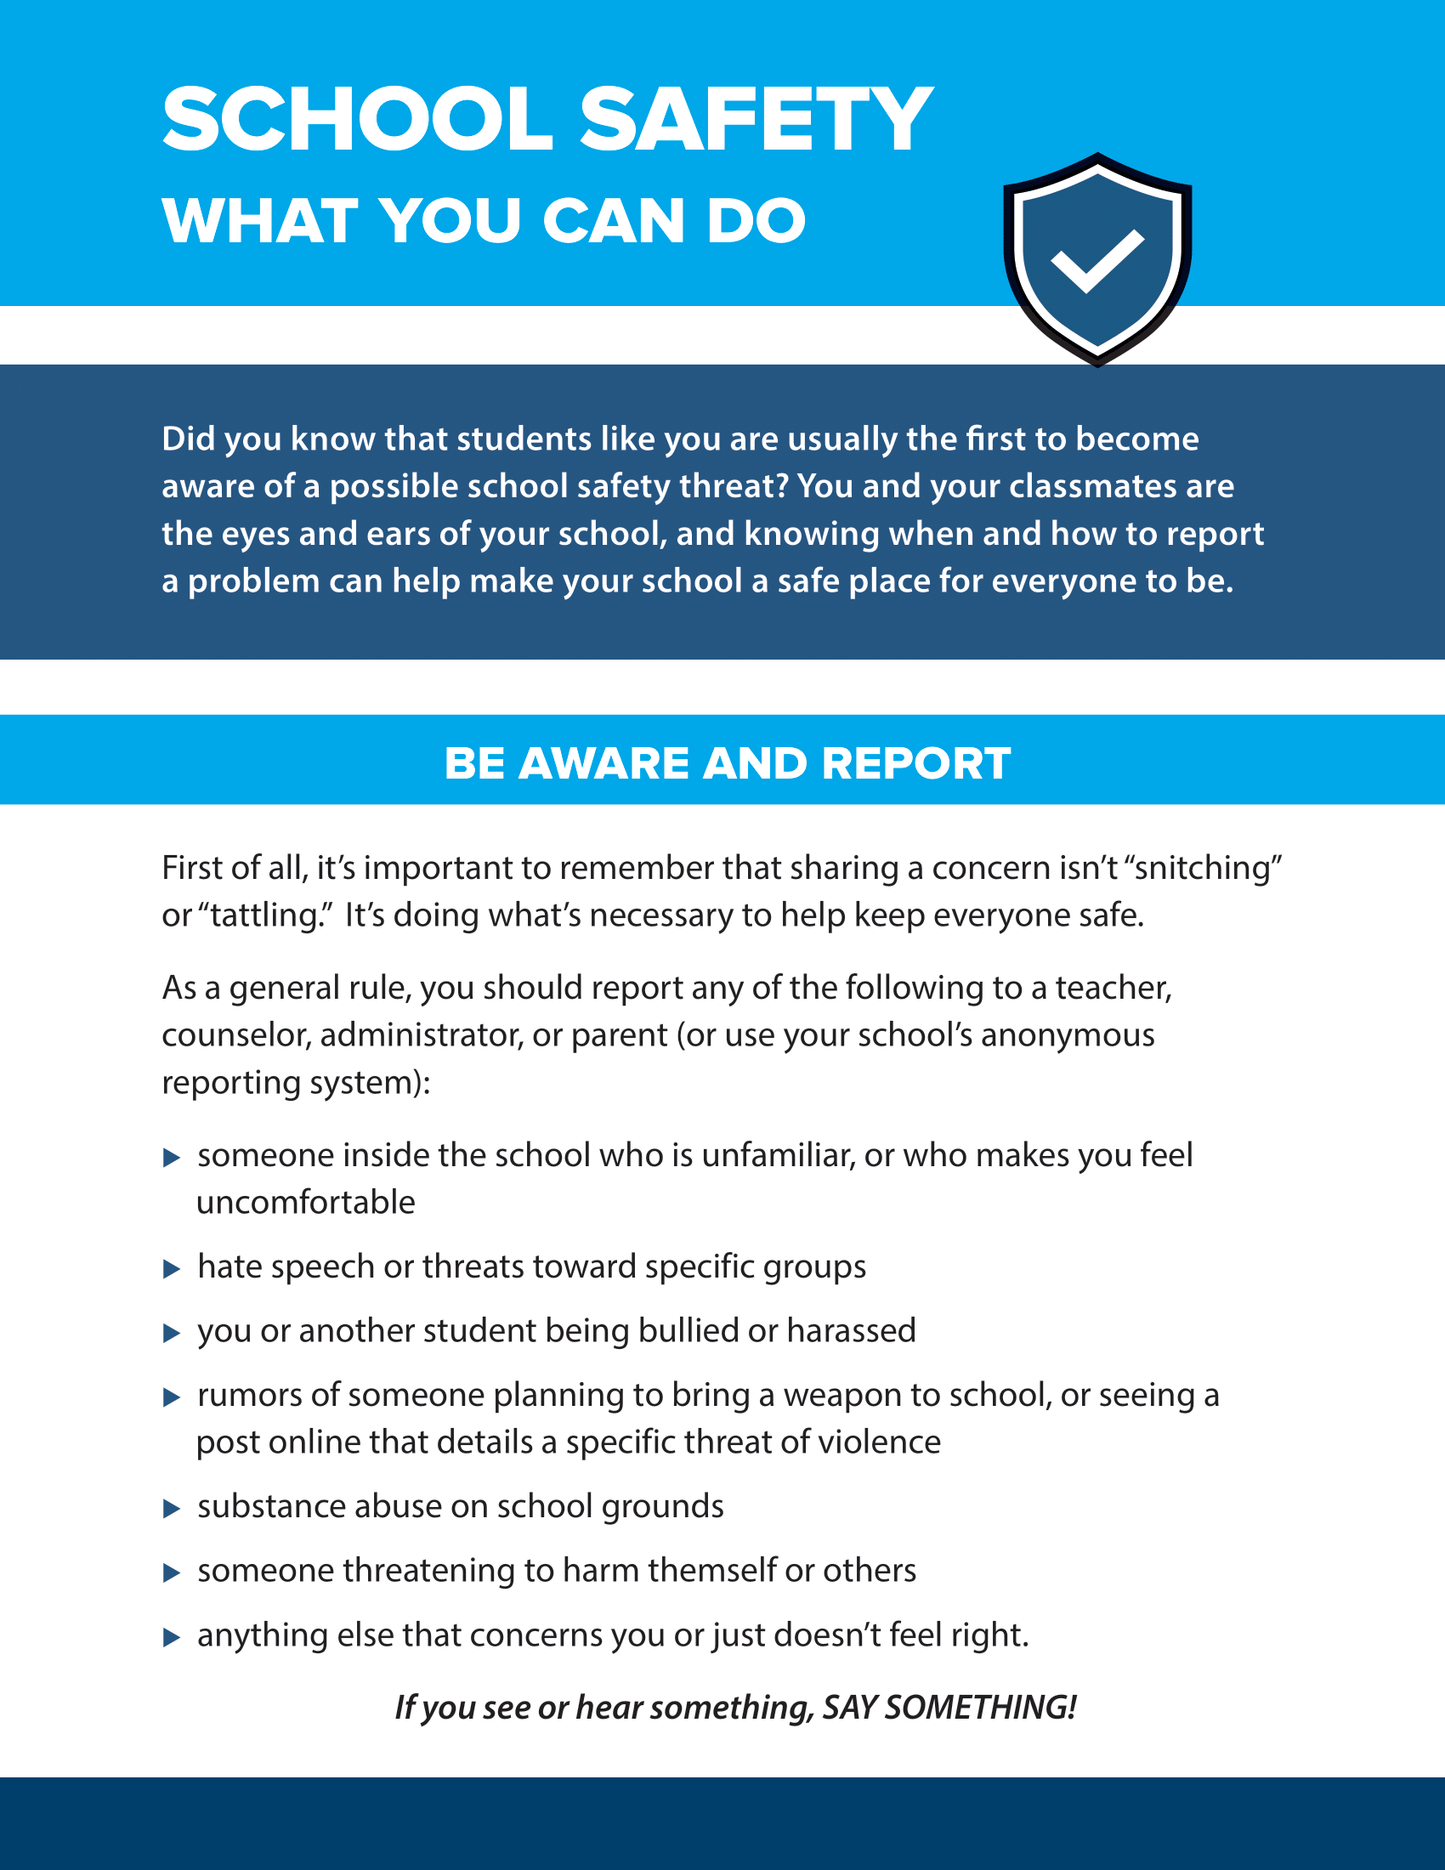 School Safety - What You Can Do